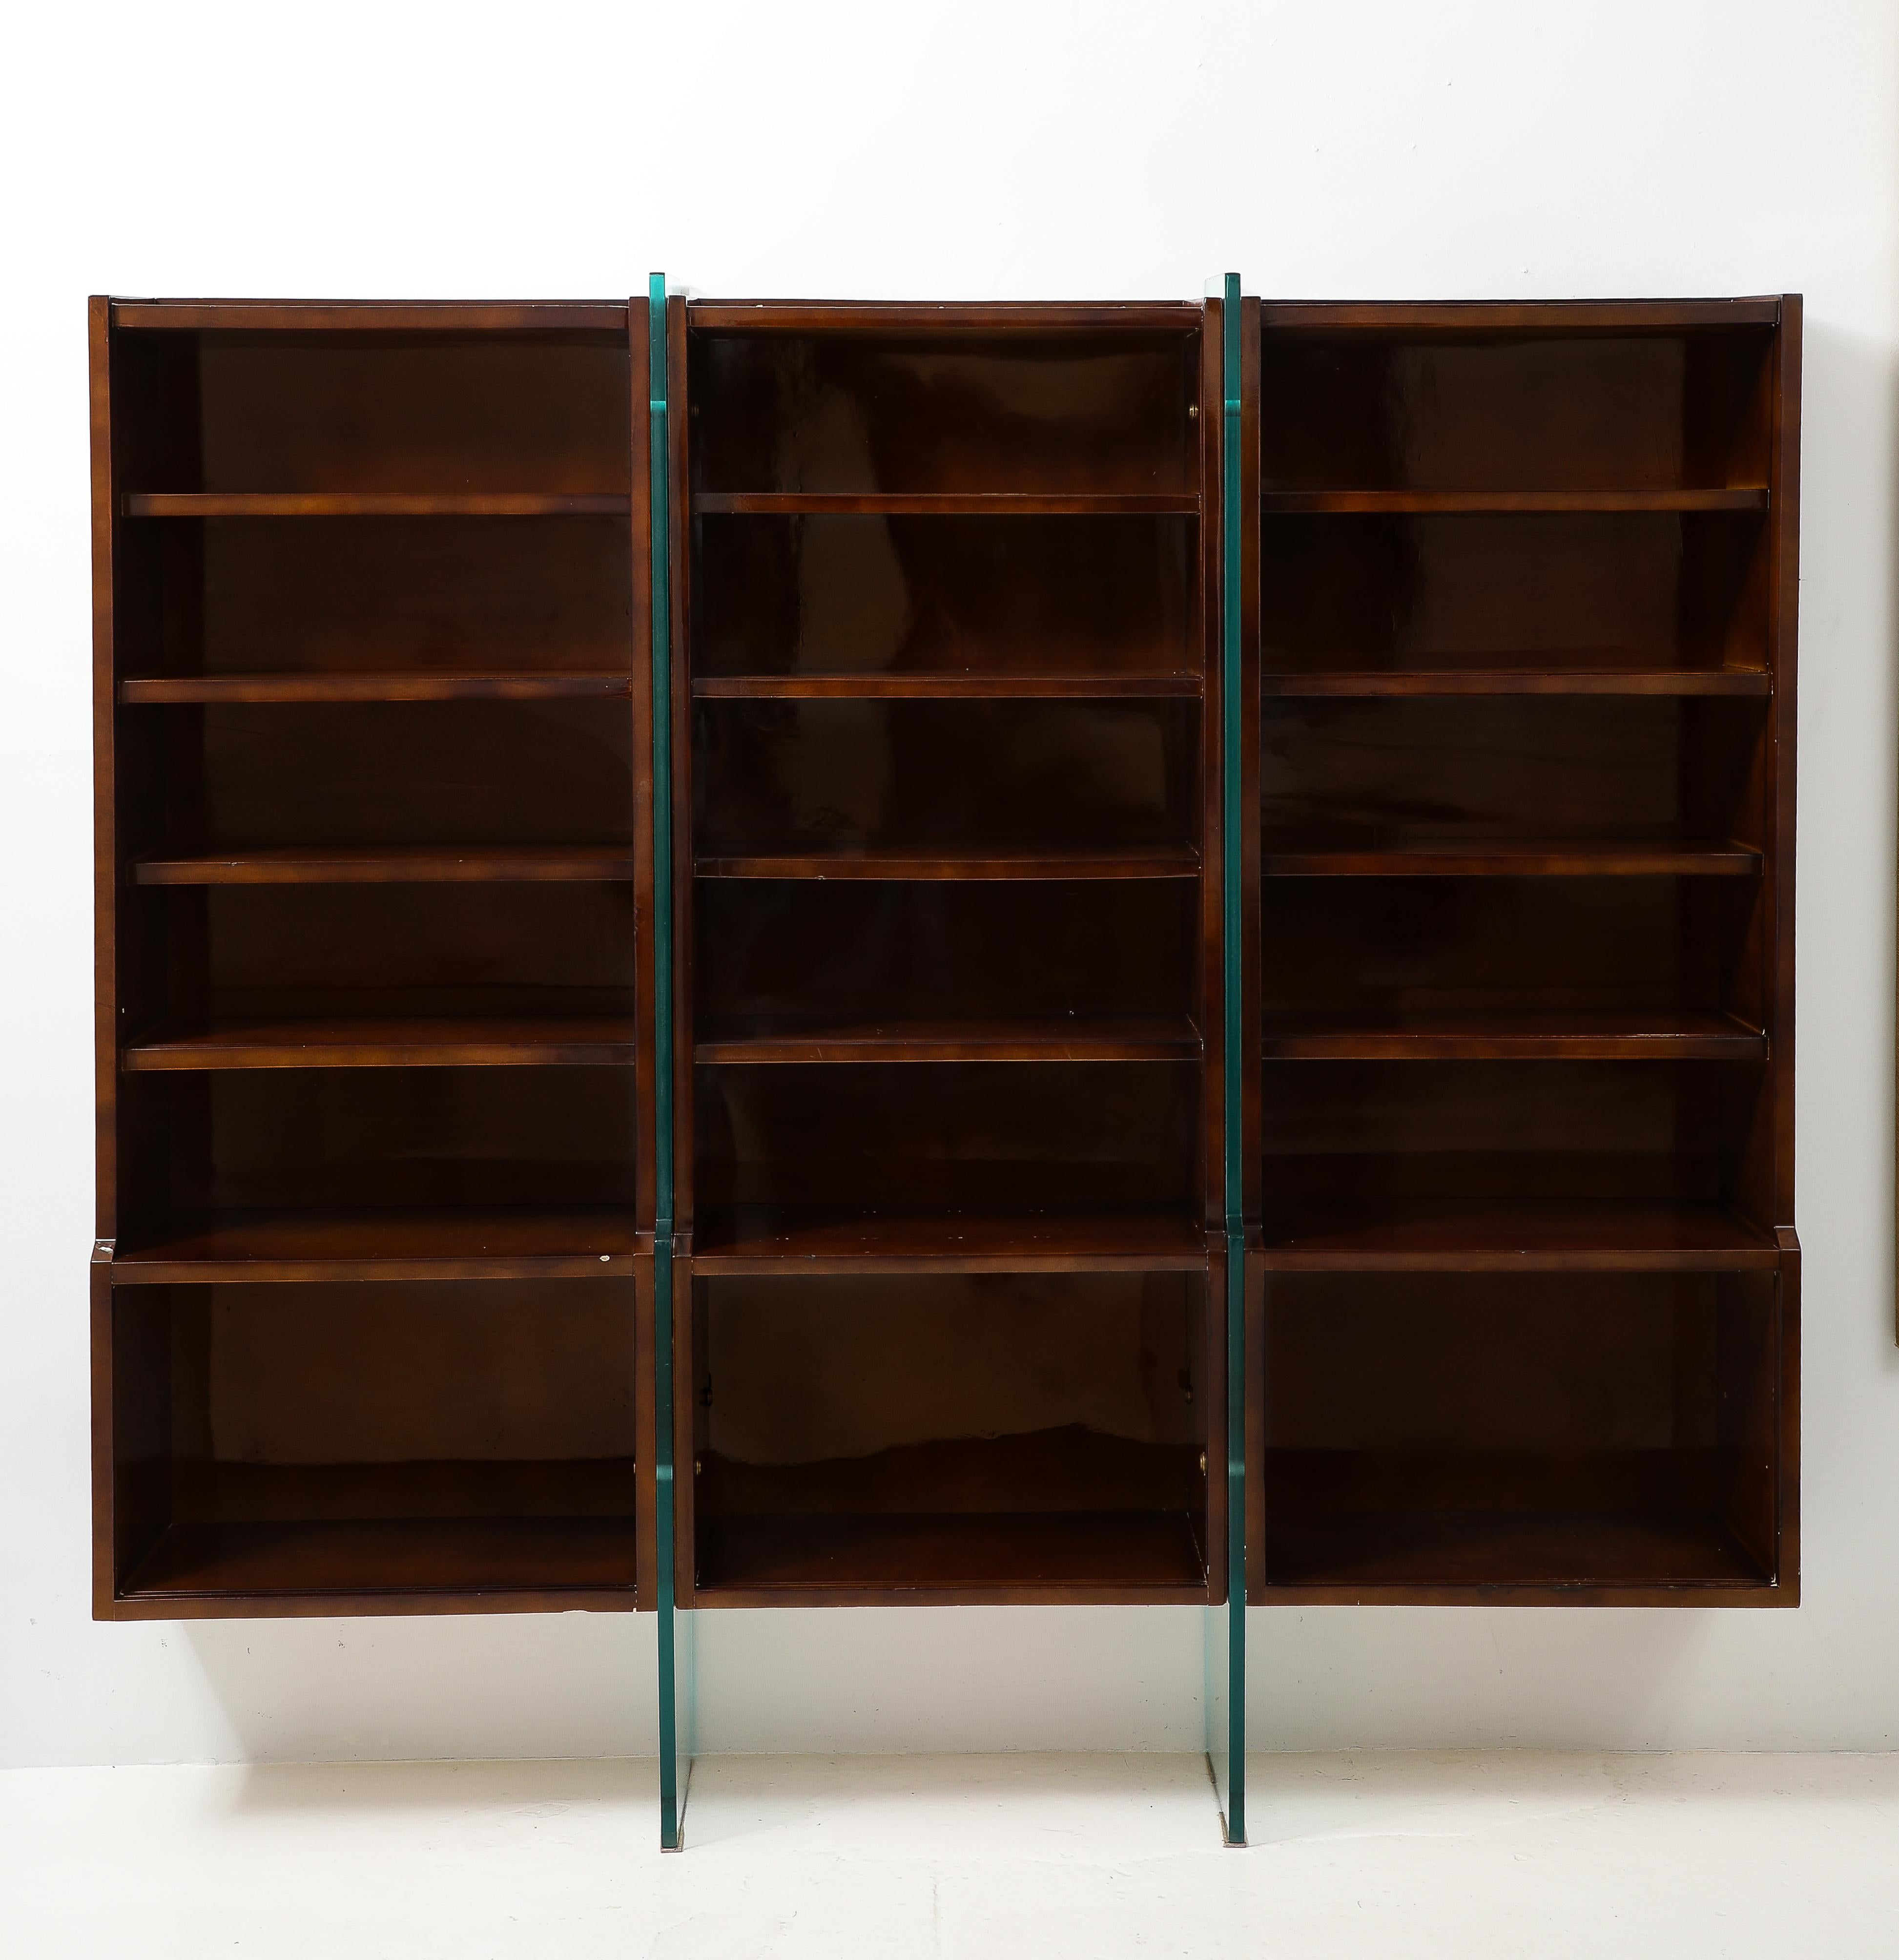 Raphael Raphel Bookcase in Lacquered Wood & Glass, France 1950's For Sale 3